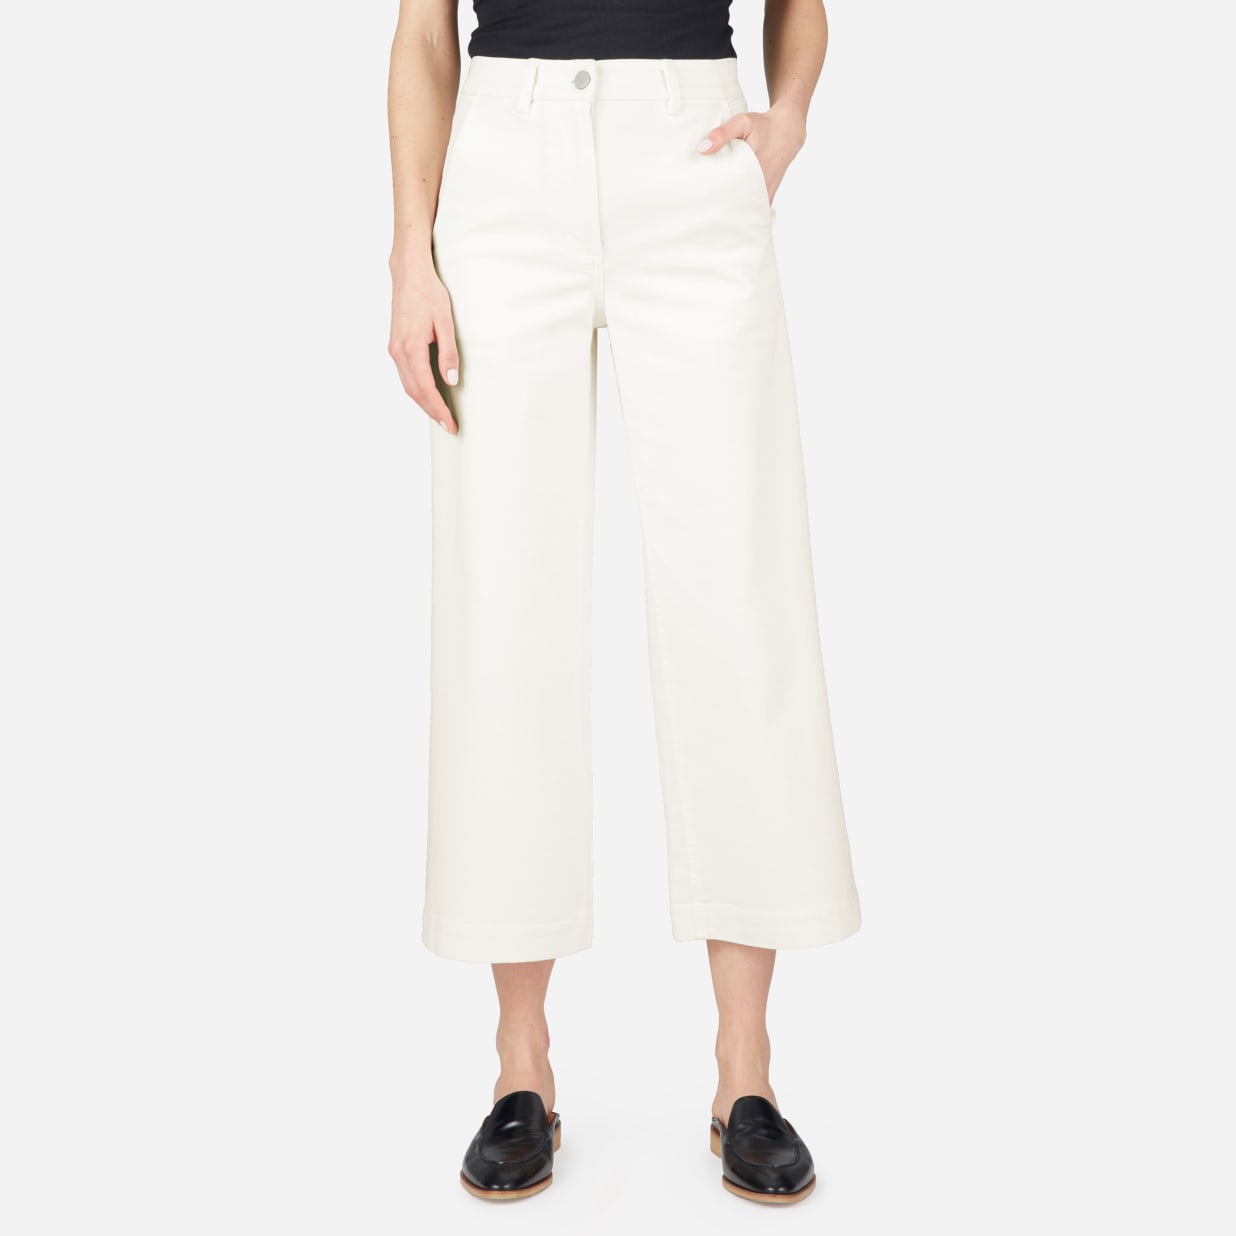 Are Cropped Pants In Style 2022